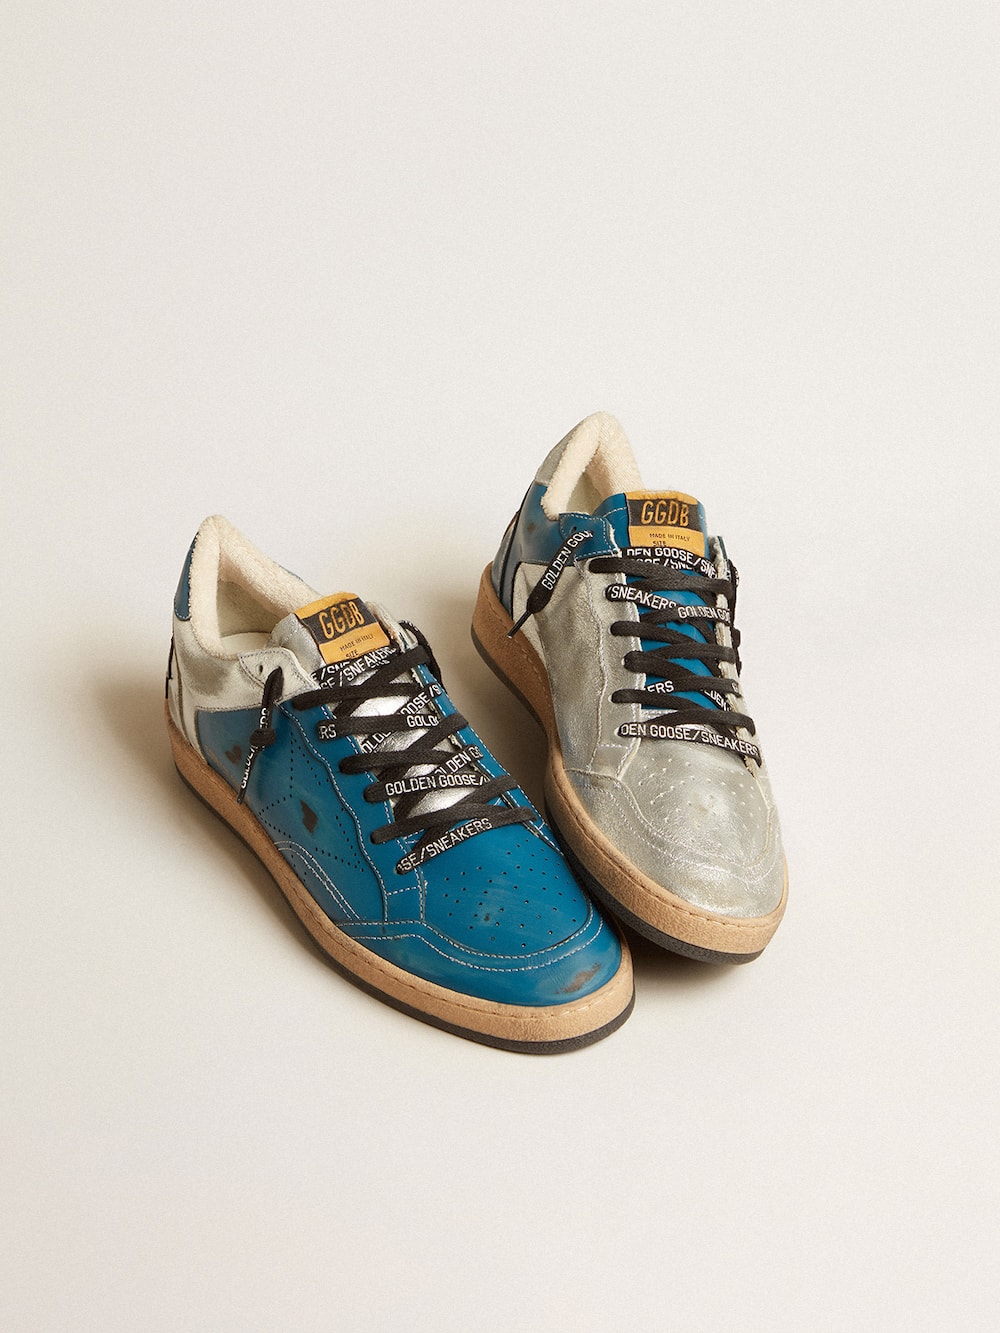 Golden Goose - Ball Star LAB in glossy blue and silver leather with perforated star in 